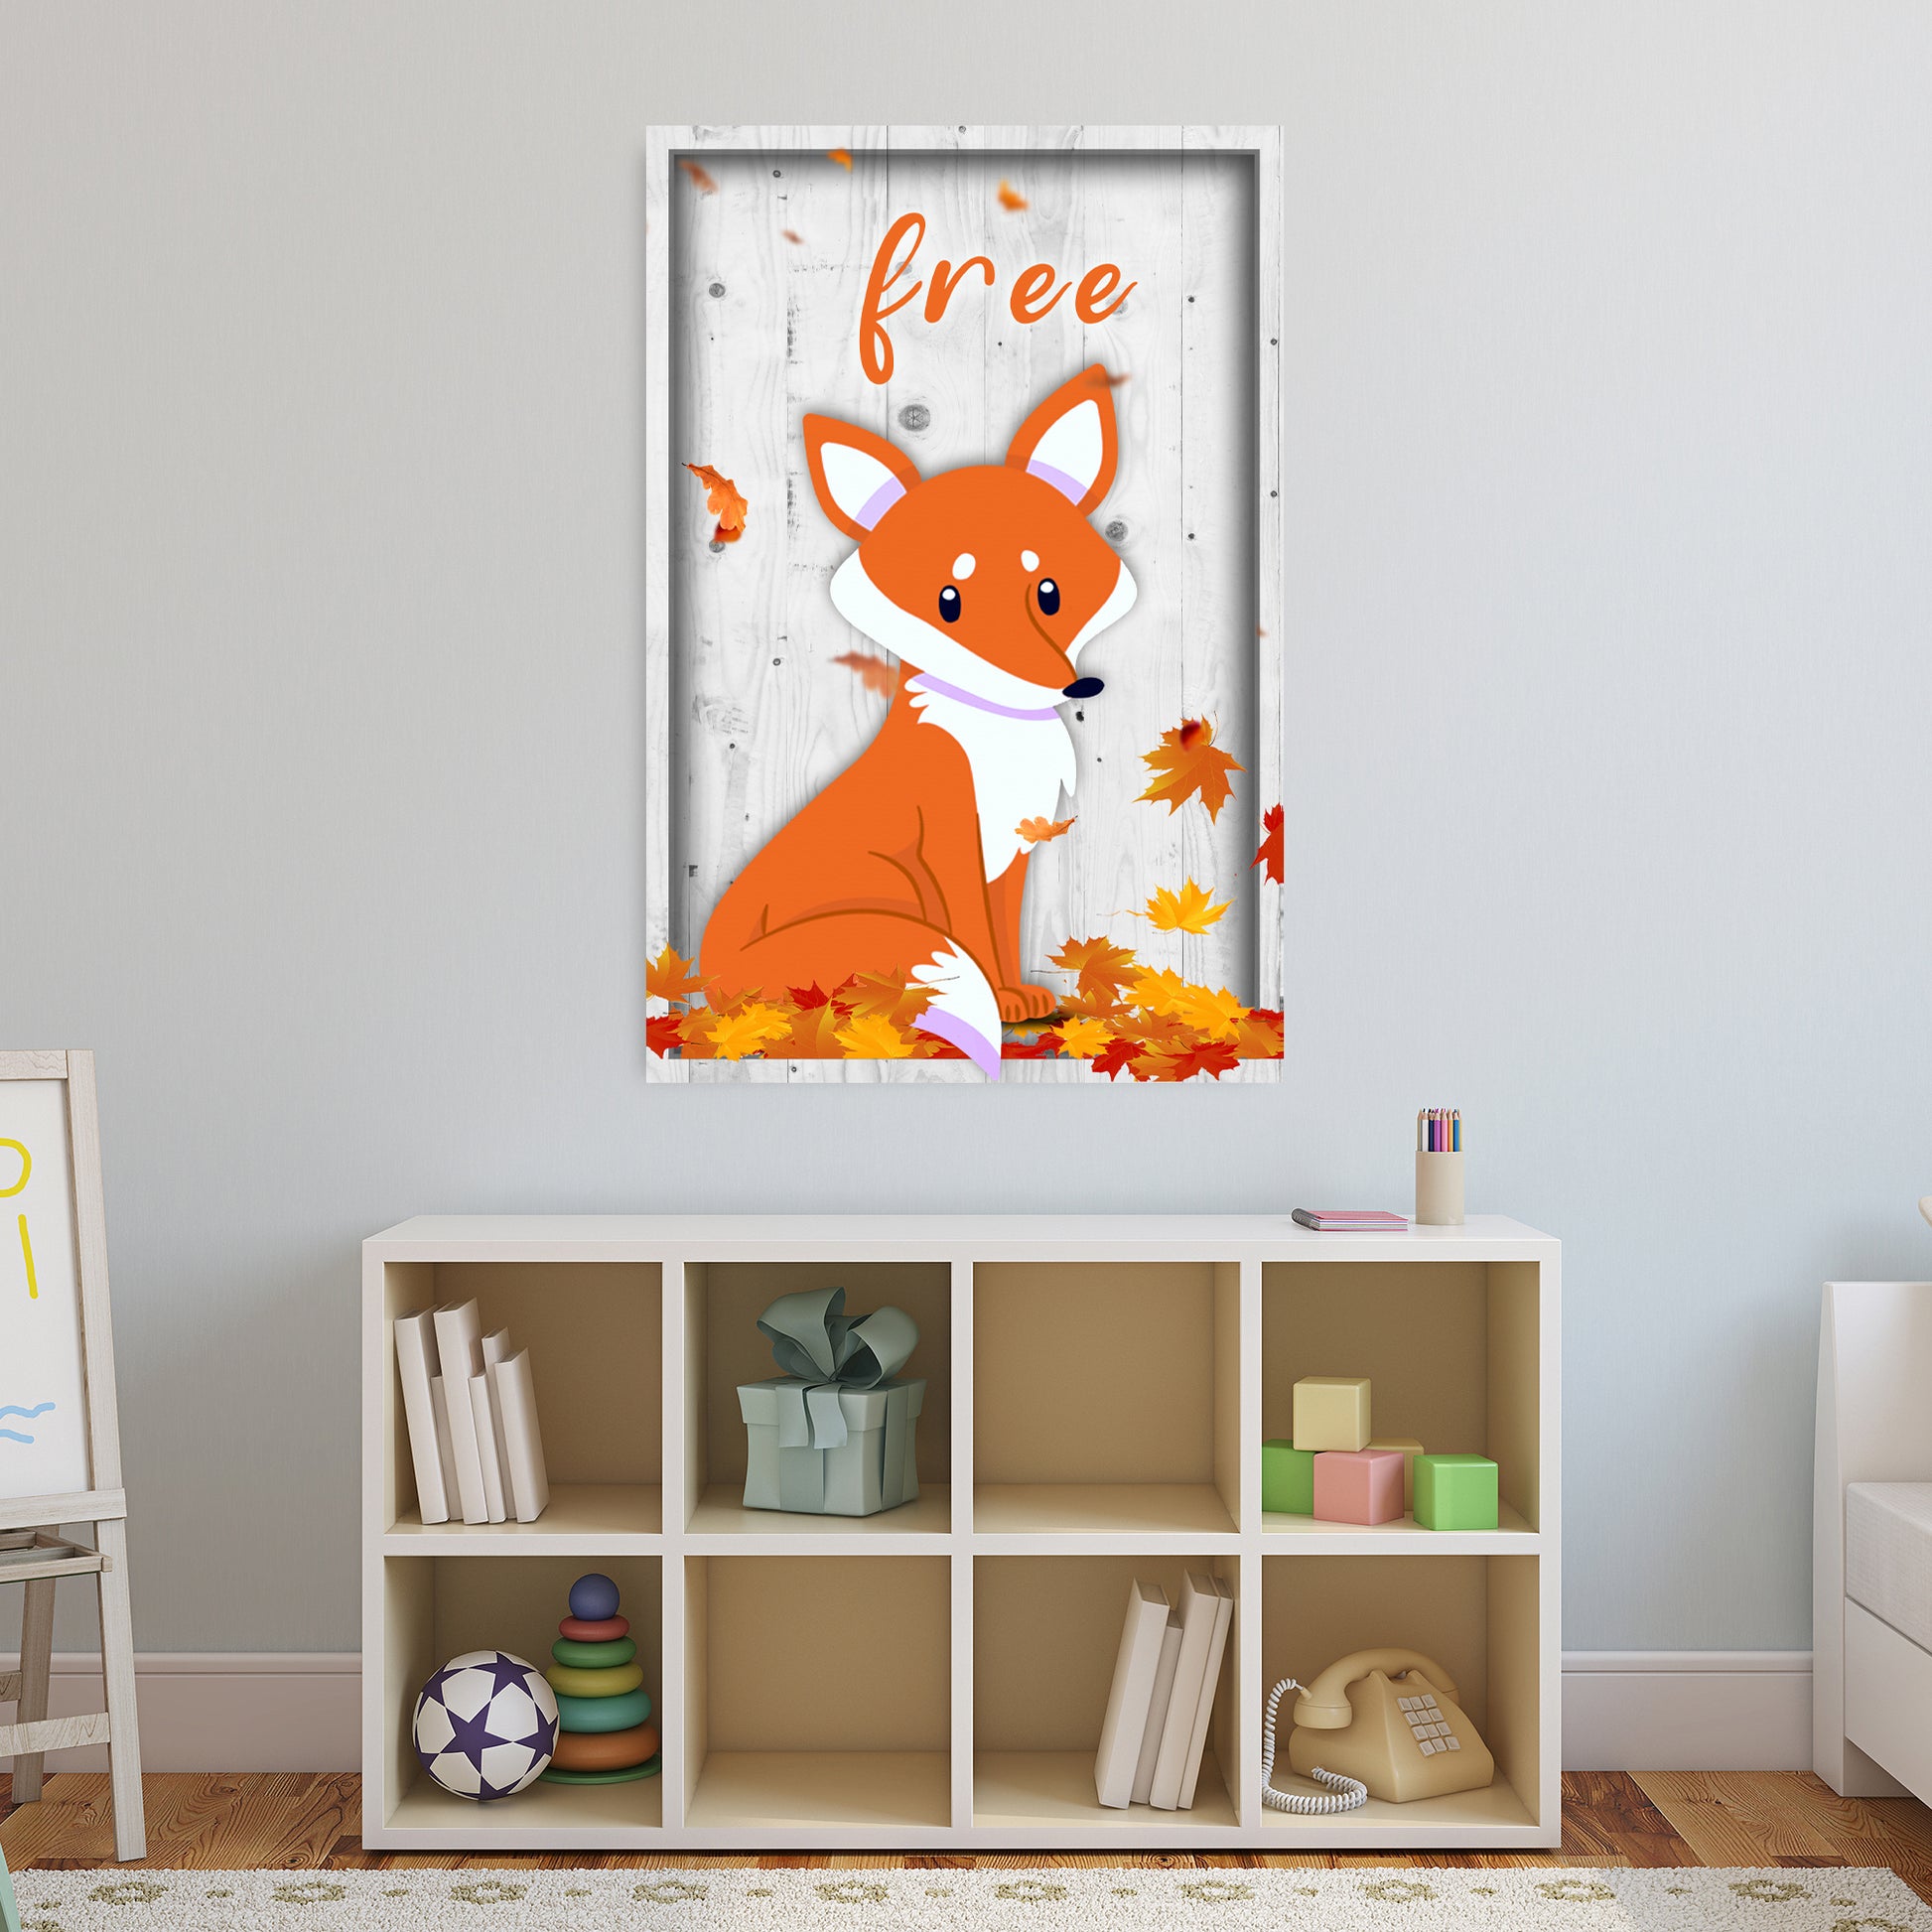 The Most Adorable Free Fox Sign Style 2 - Image by Tailored Canvases